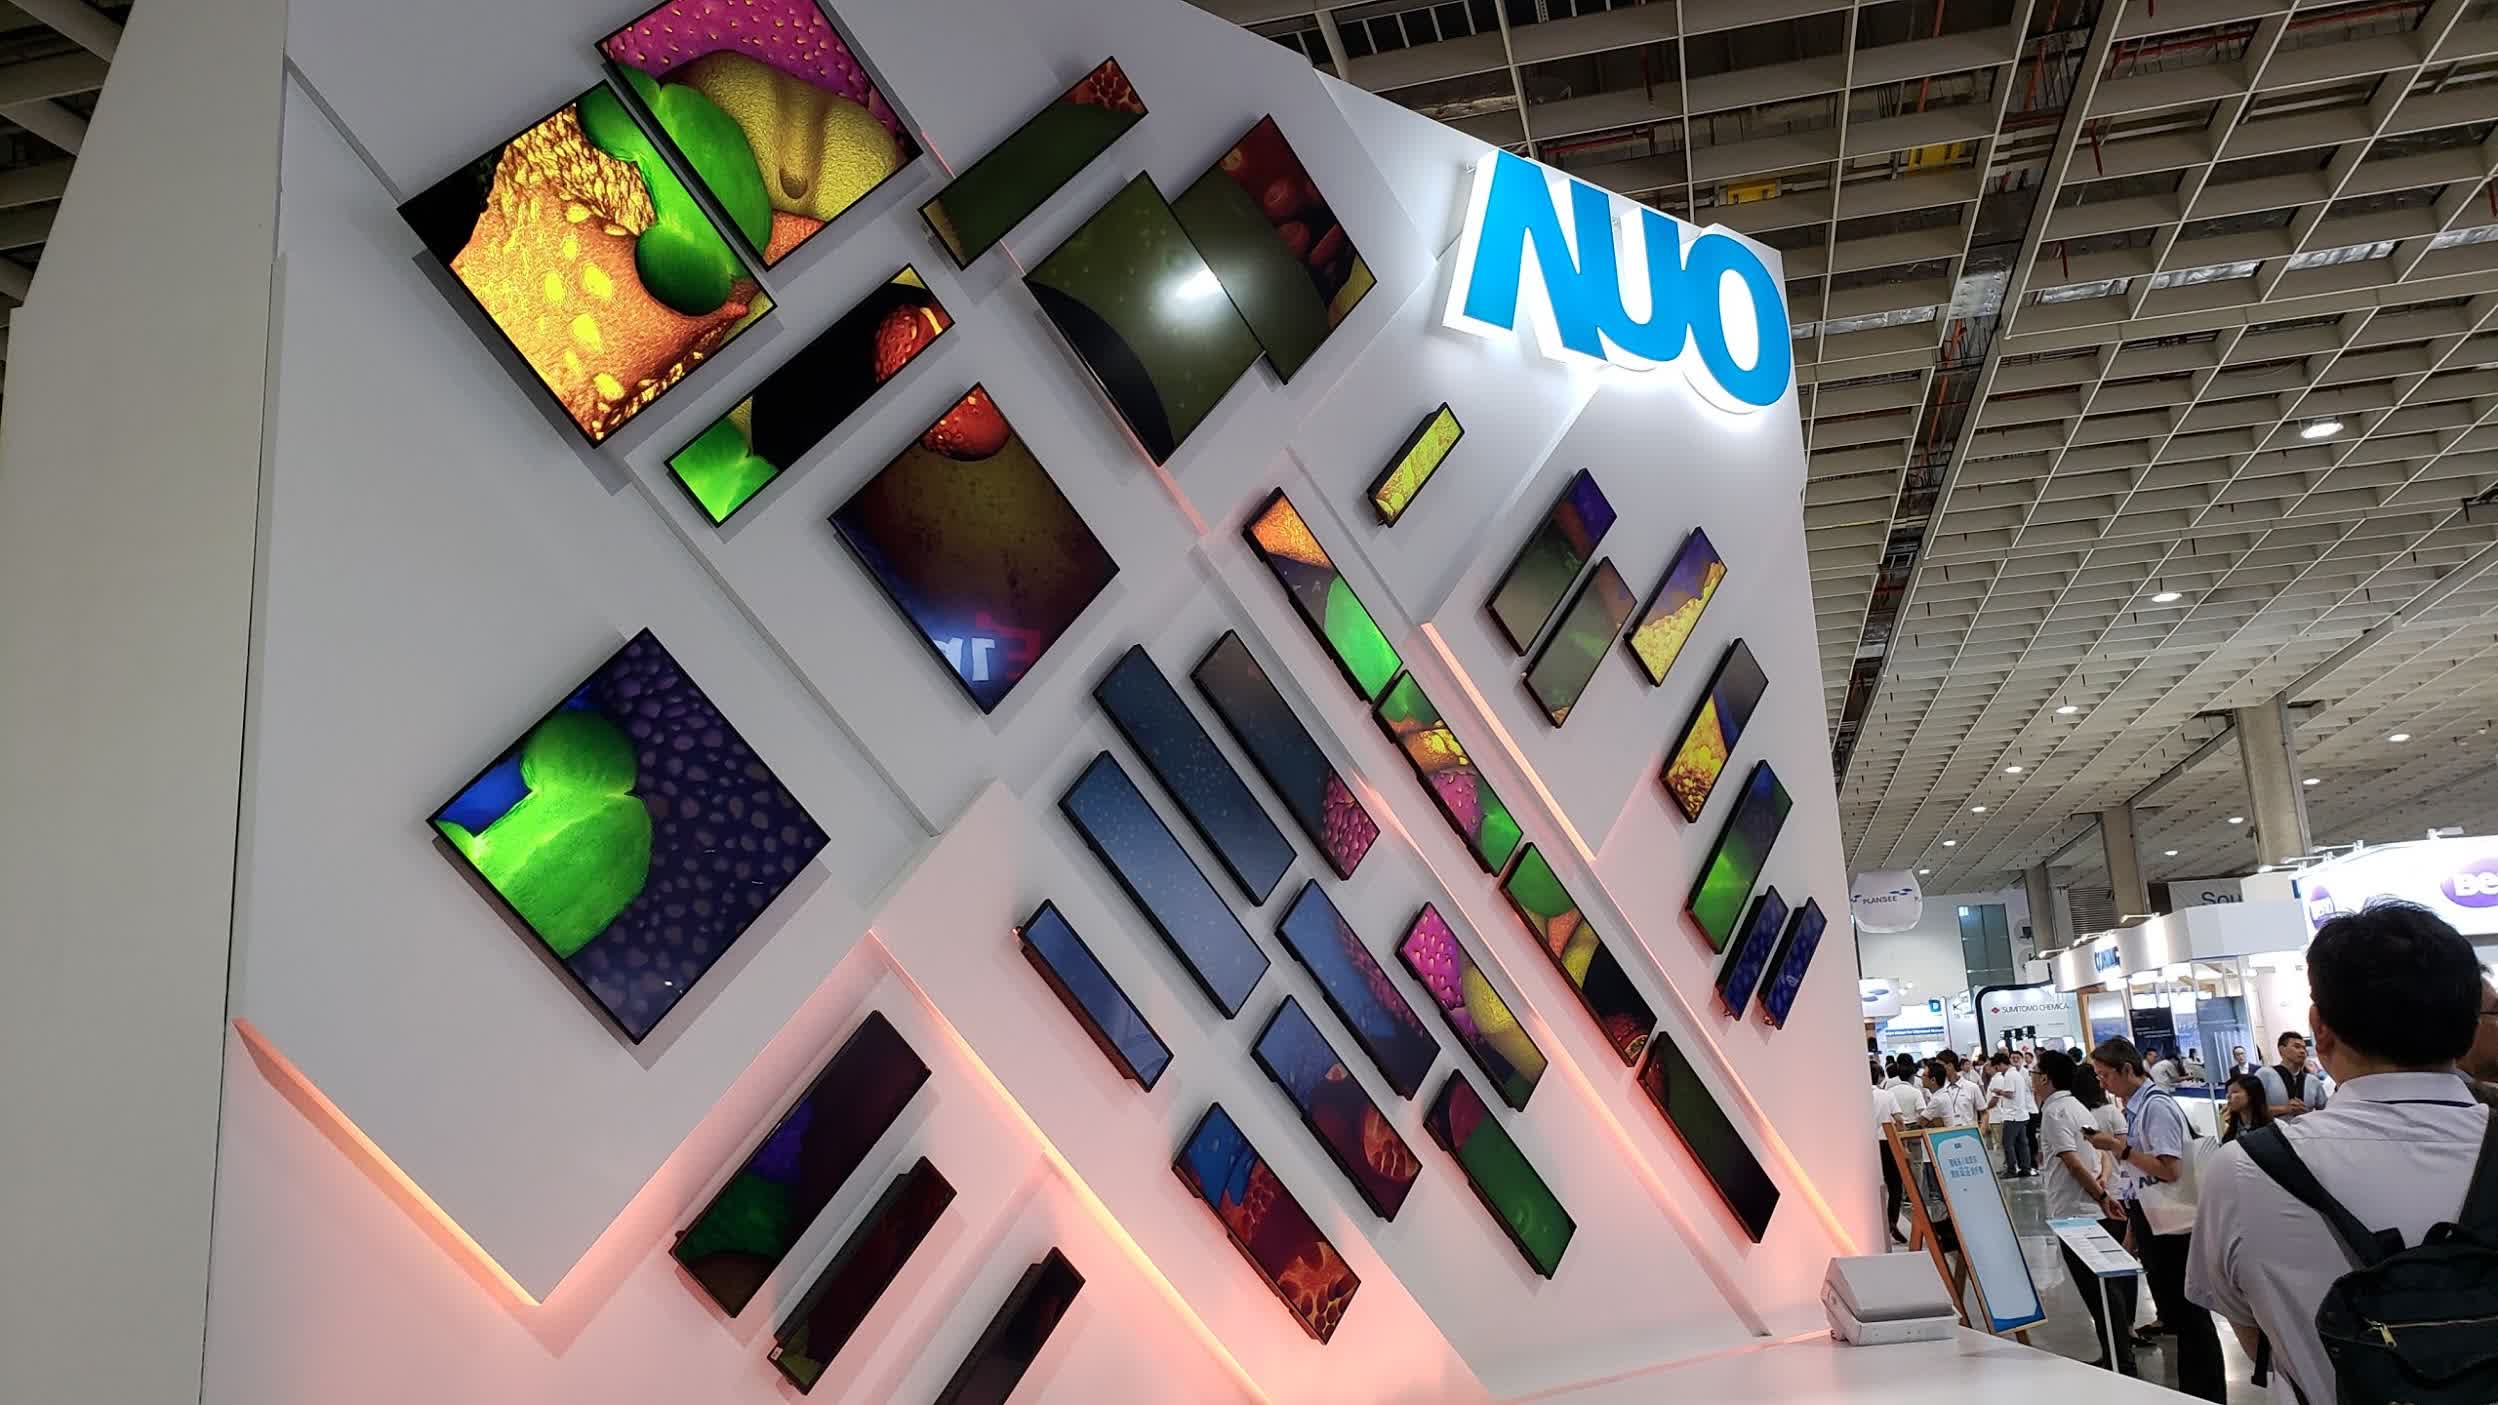 AUO demos microLED displays for laptops, but they're not quite ready